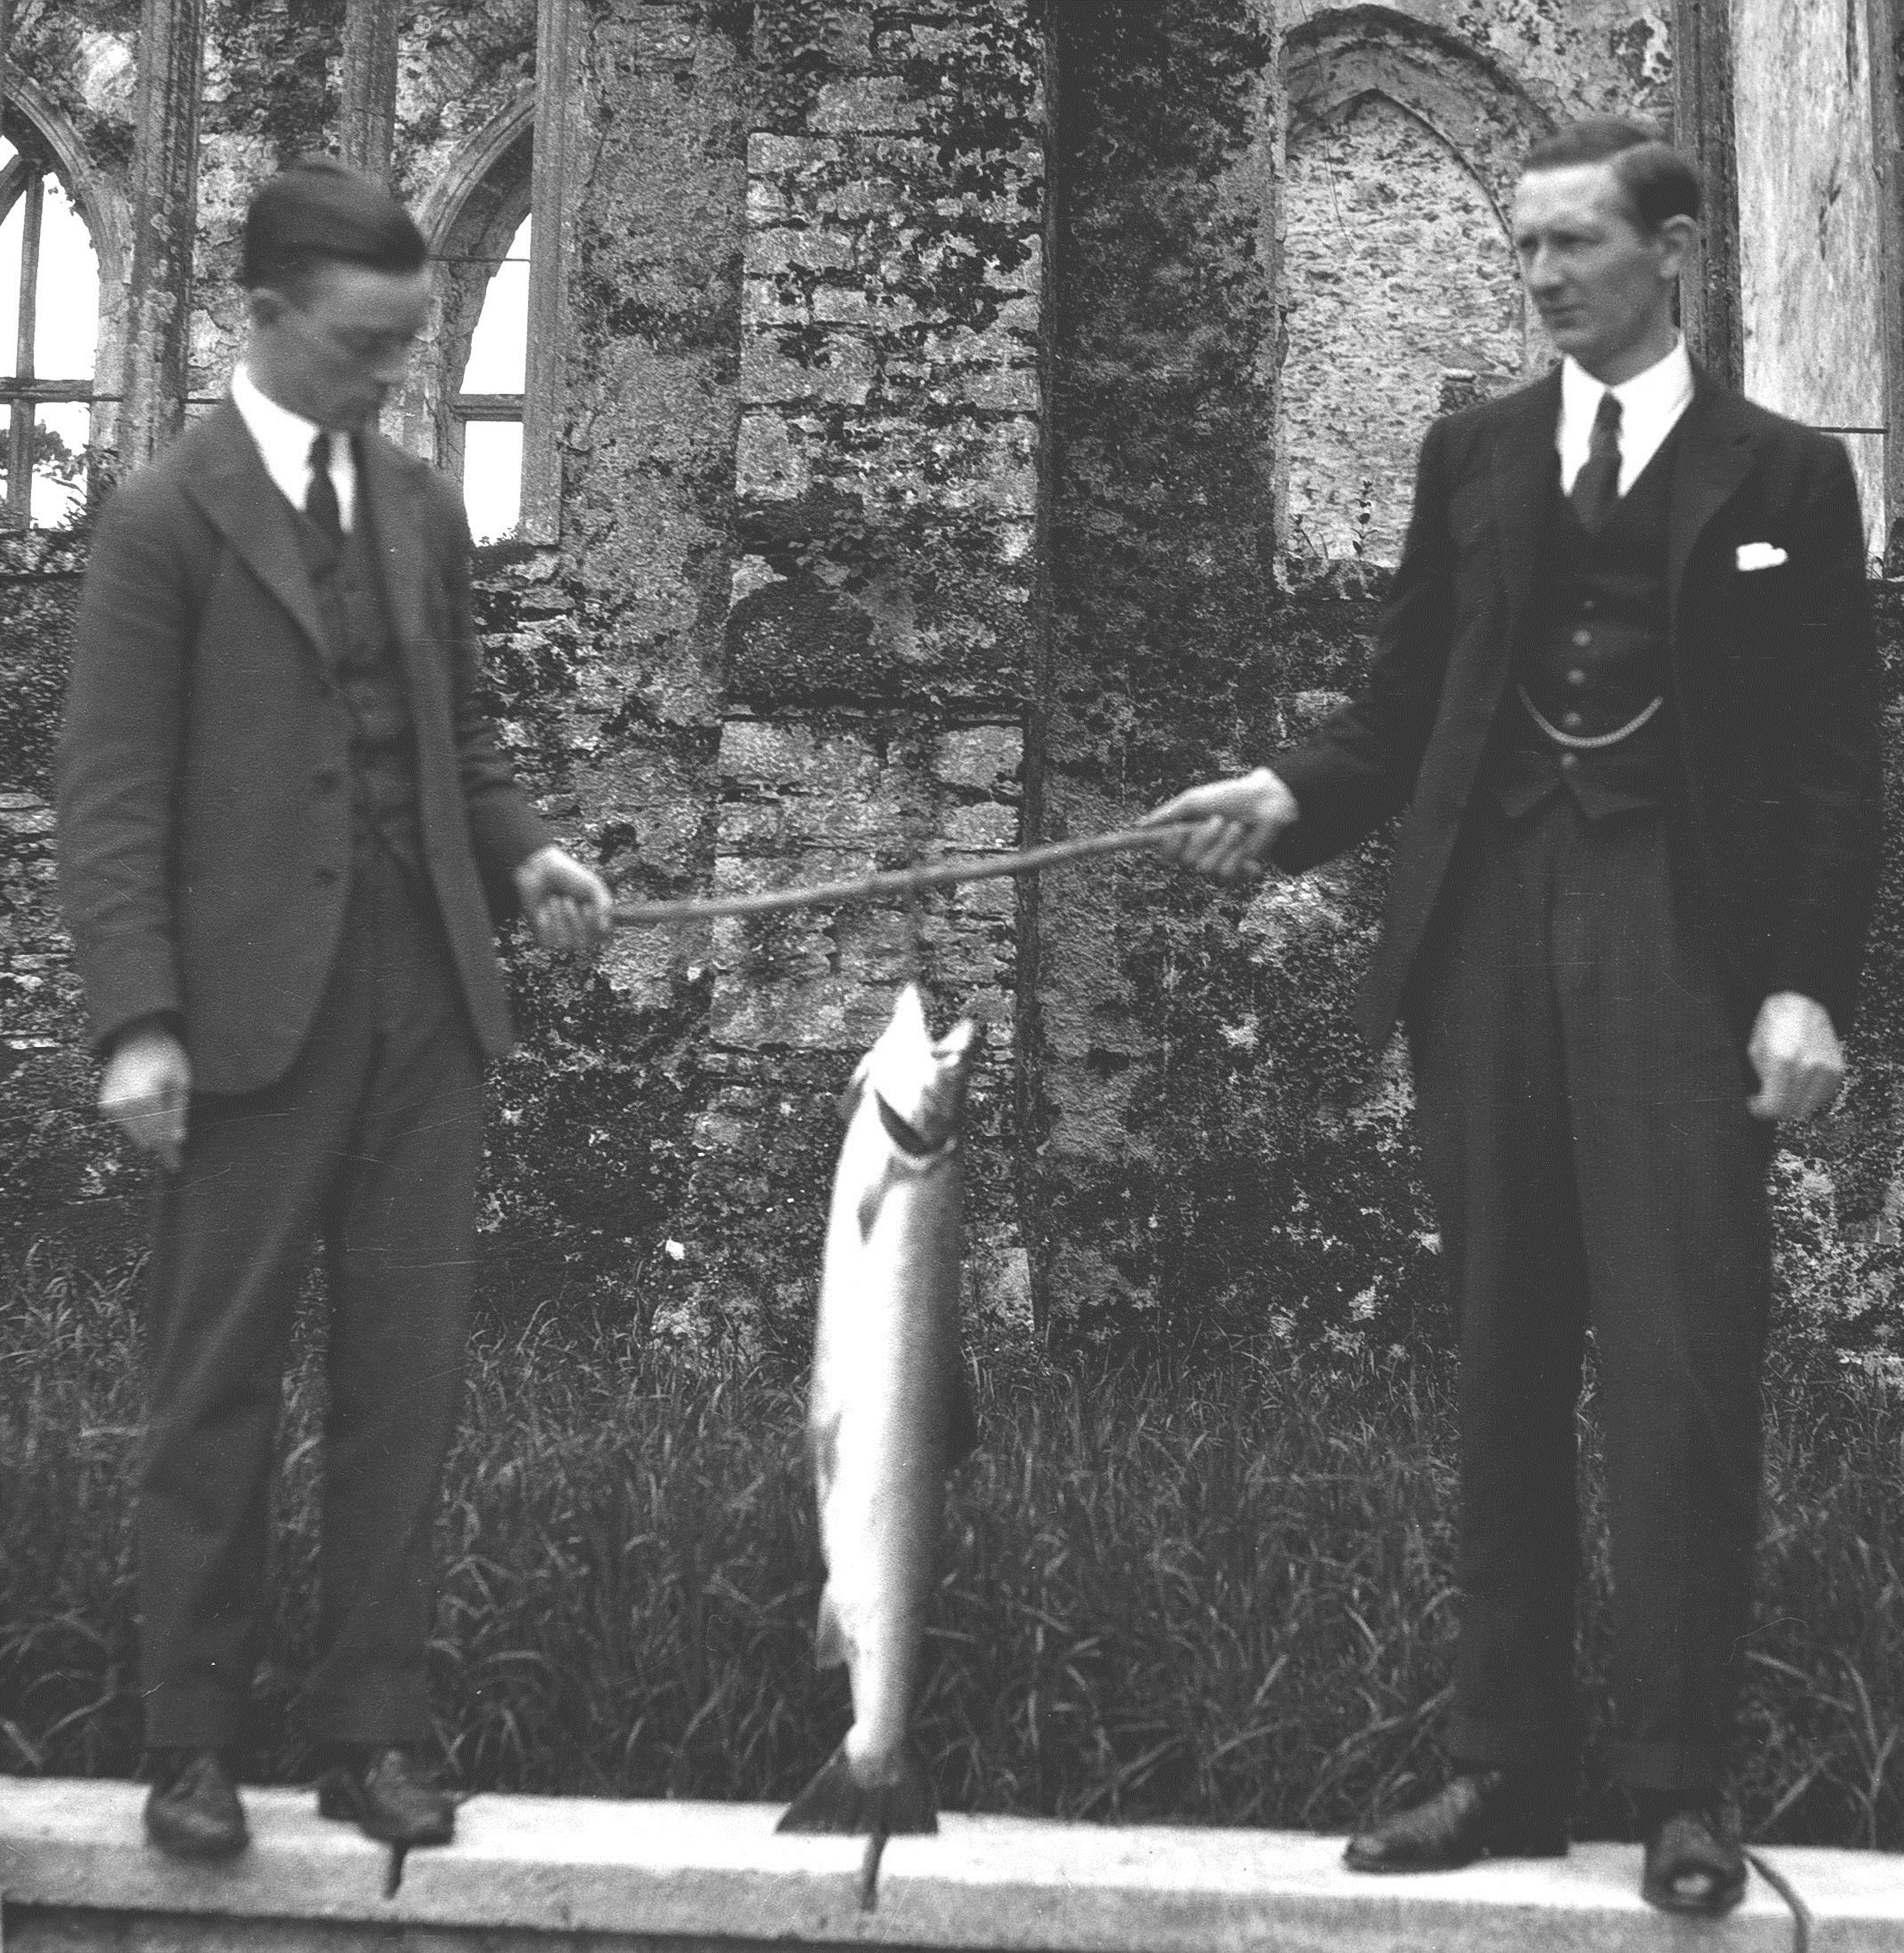 L-R: Herbert Mills, Walter Thomas, with a salmon they caught in the Dart at Folly Pool.